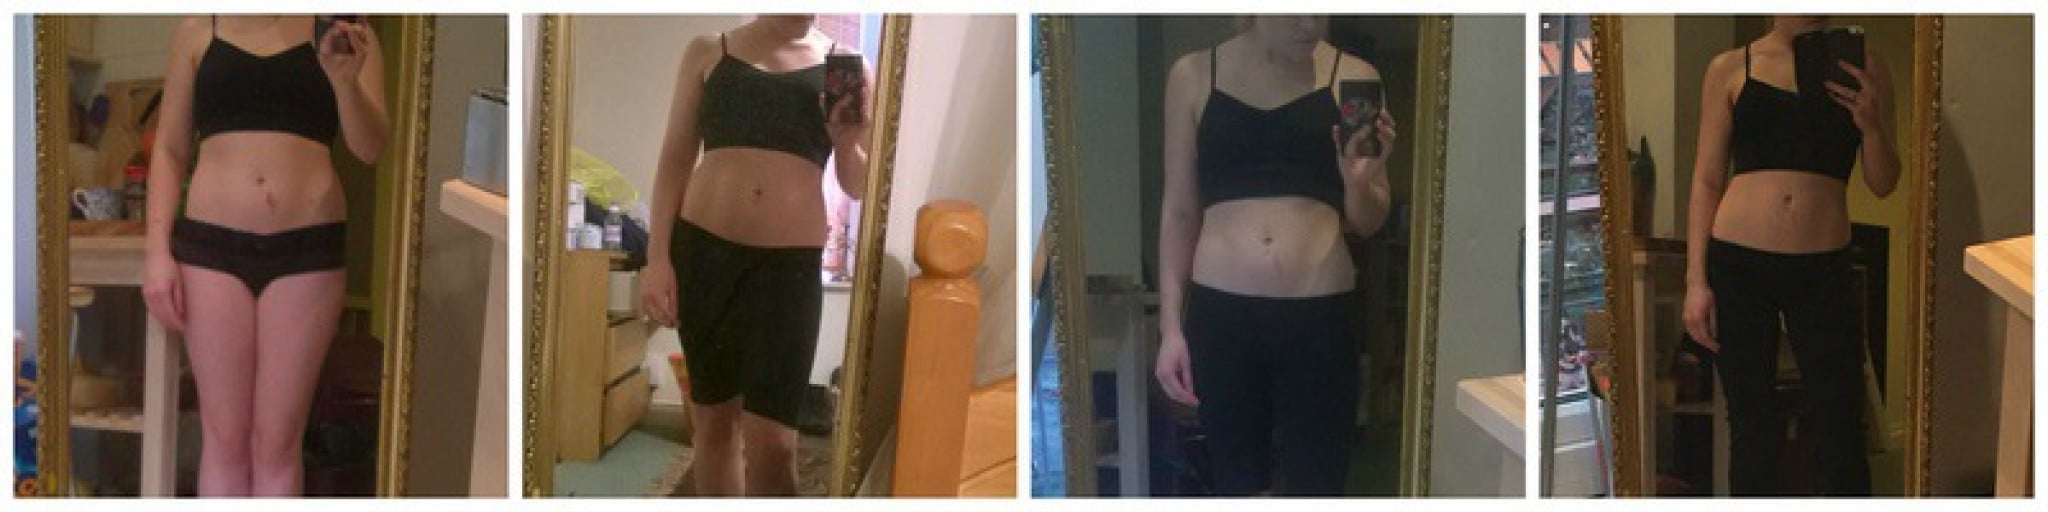 Woman Sheds 13Lbs in 2.5 Months: a Reddit Success Story